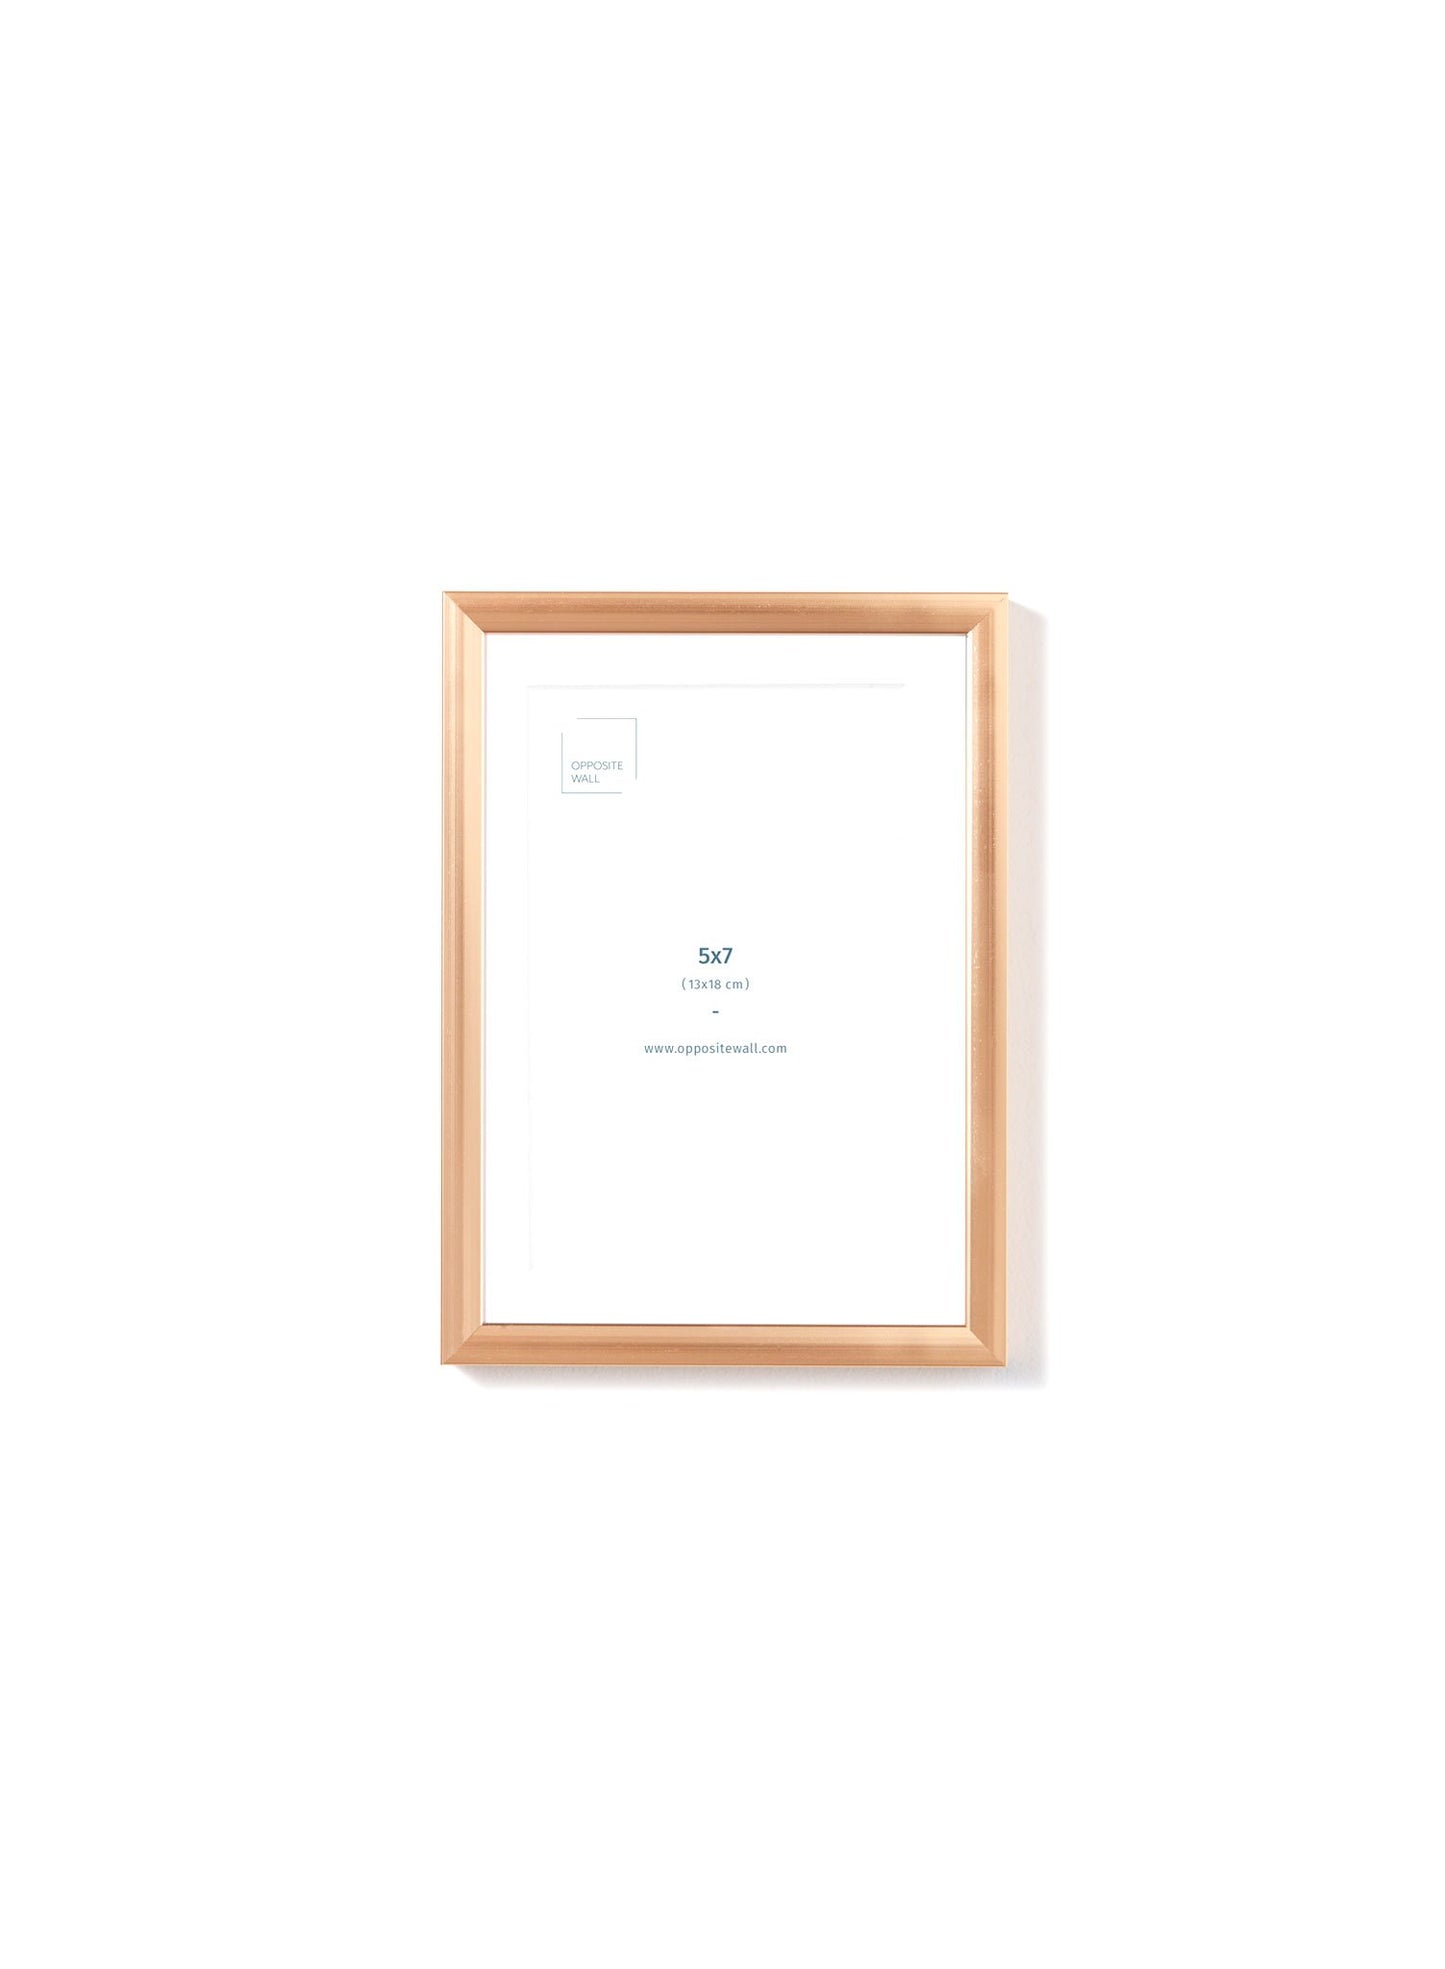 Gold Metal Frame, 5x7 in | 13x18 cm